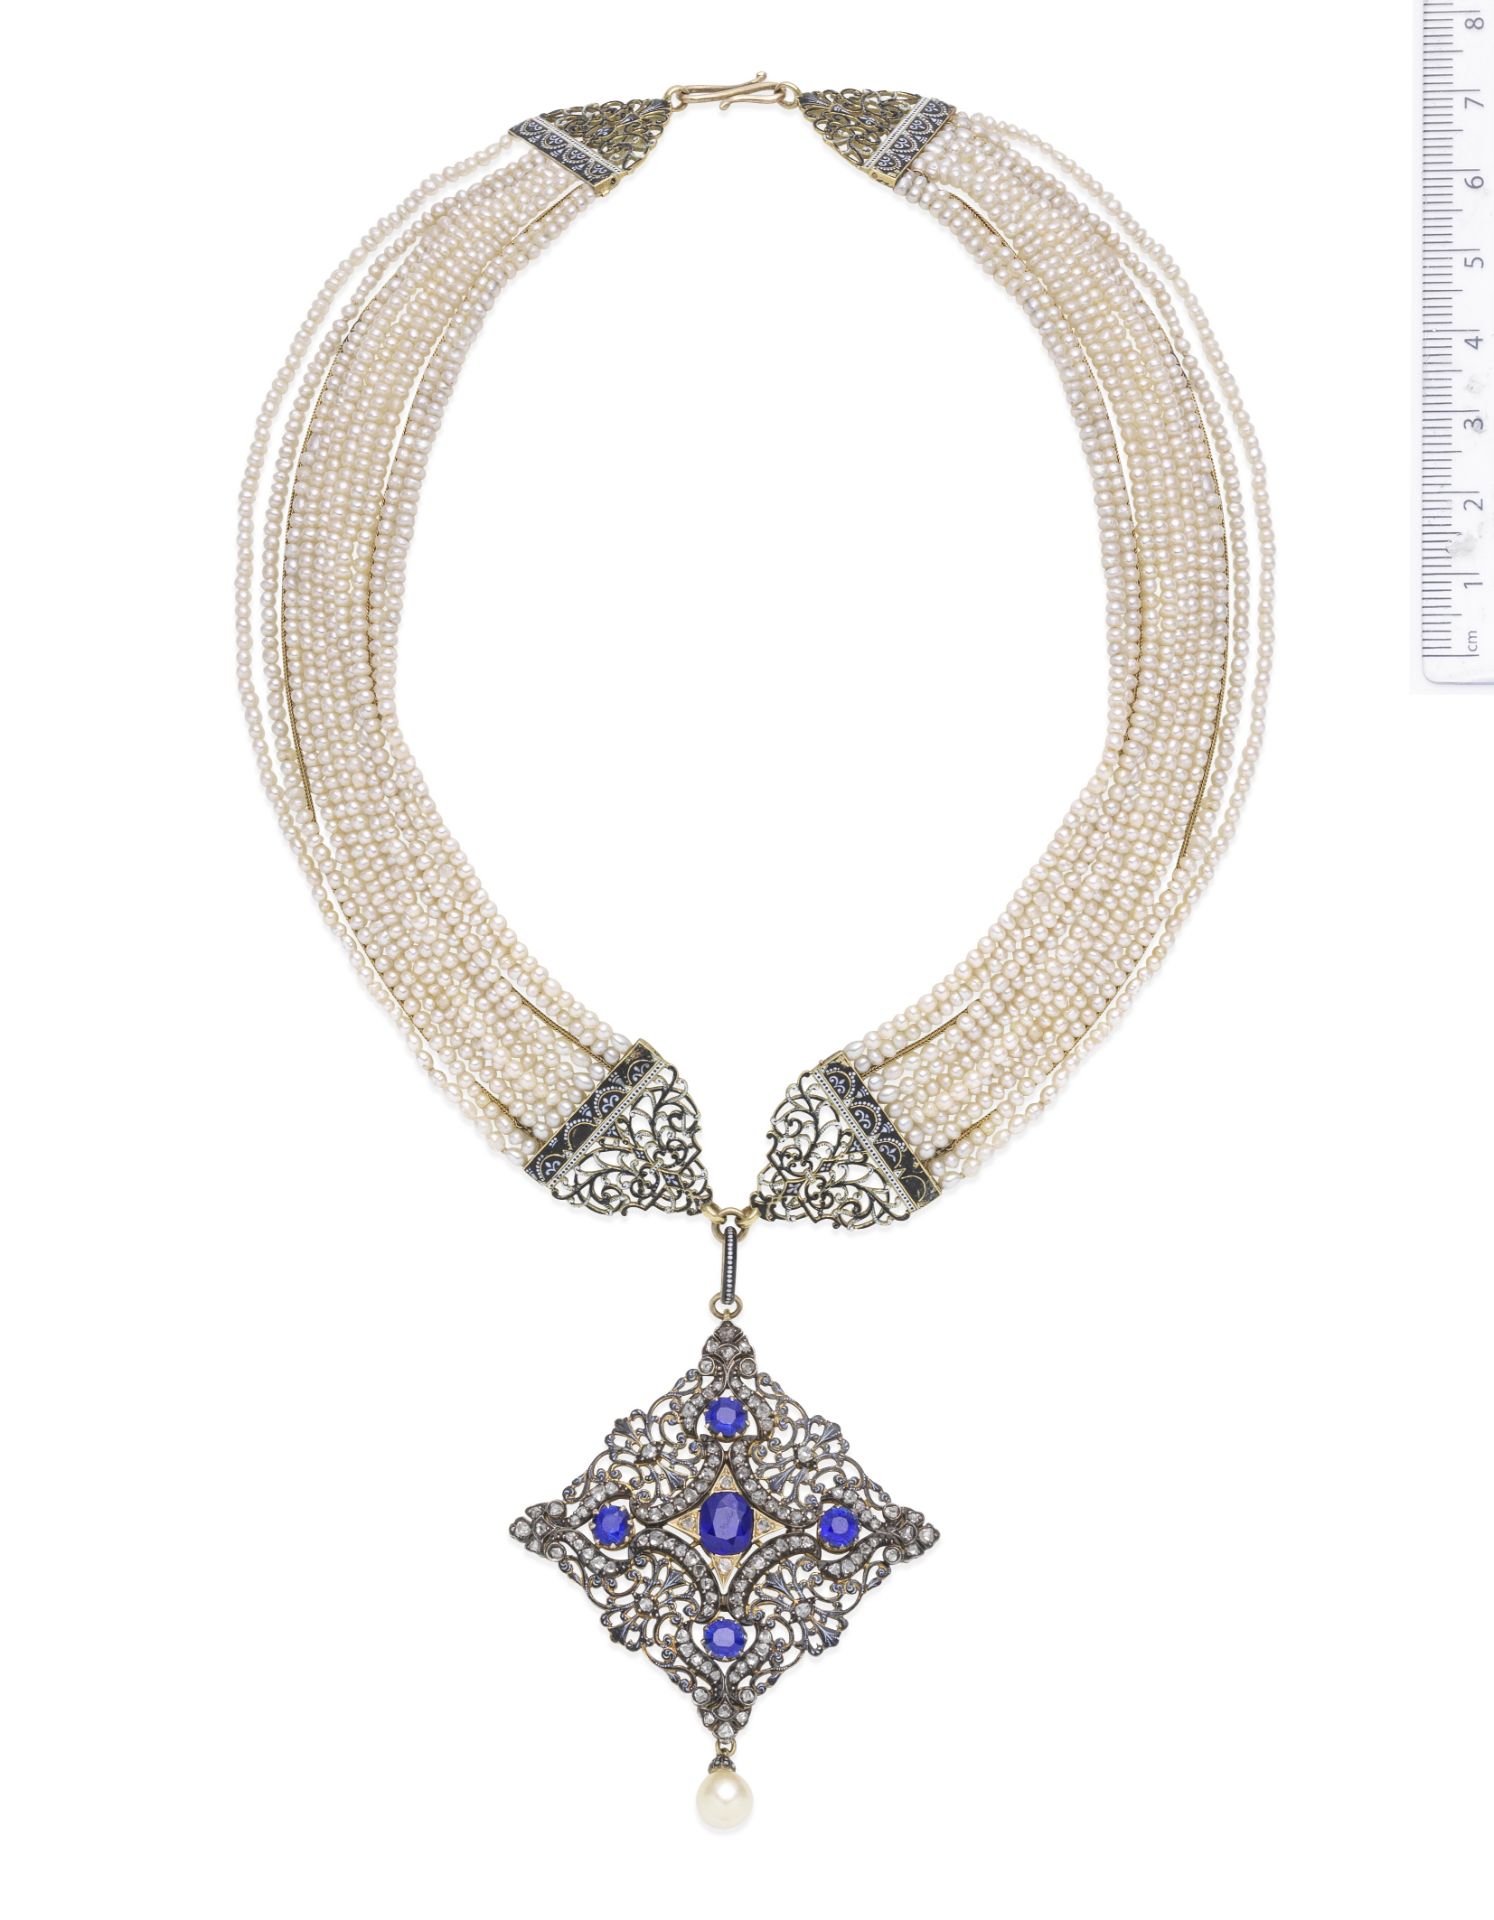 A seed pearl, sapphire and enamel necklace, by Carlo Giuliano,